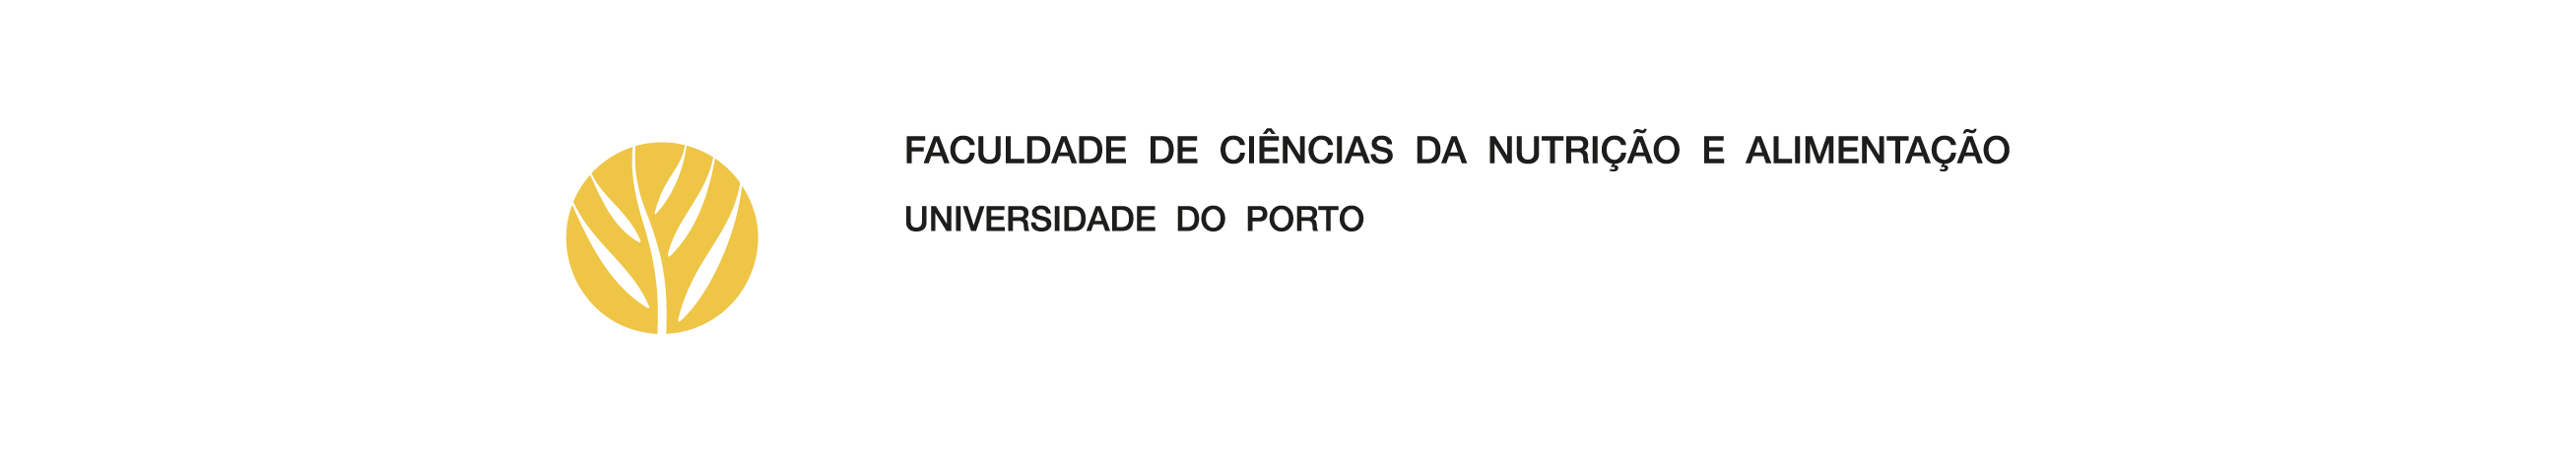 Logo - Faculty of Nutrition and Food Sciences of the University of Porto (2006)